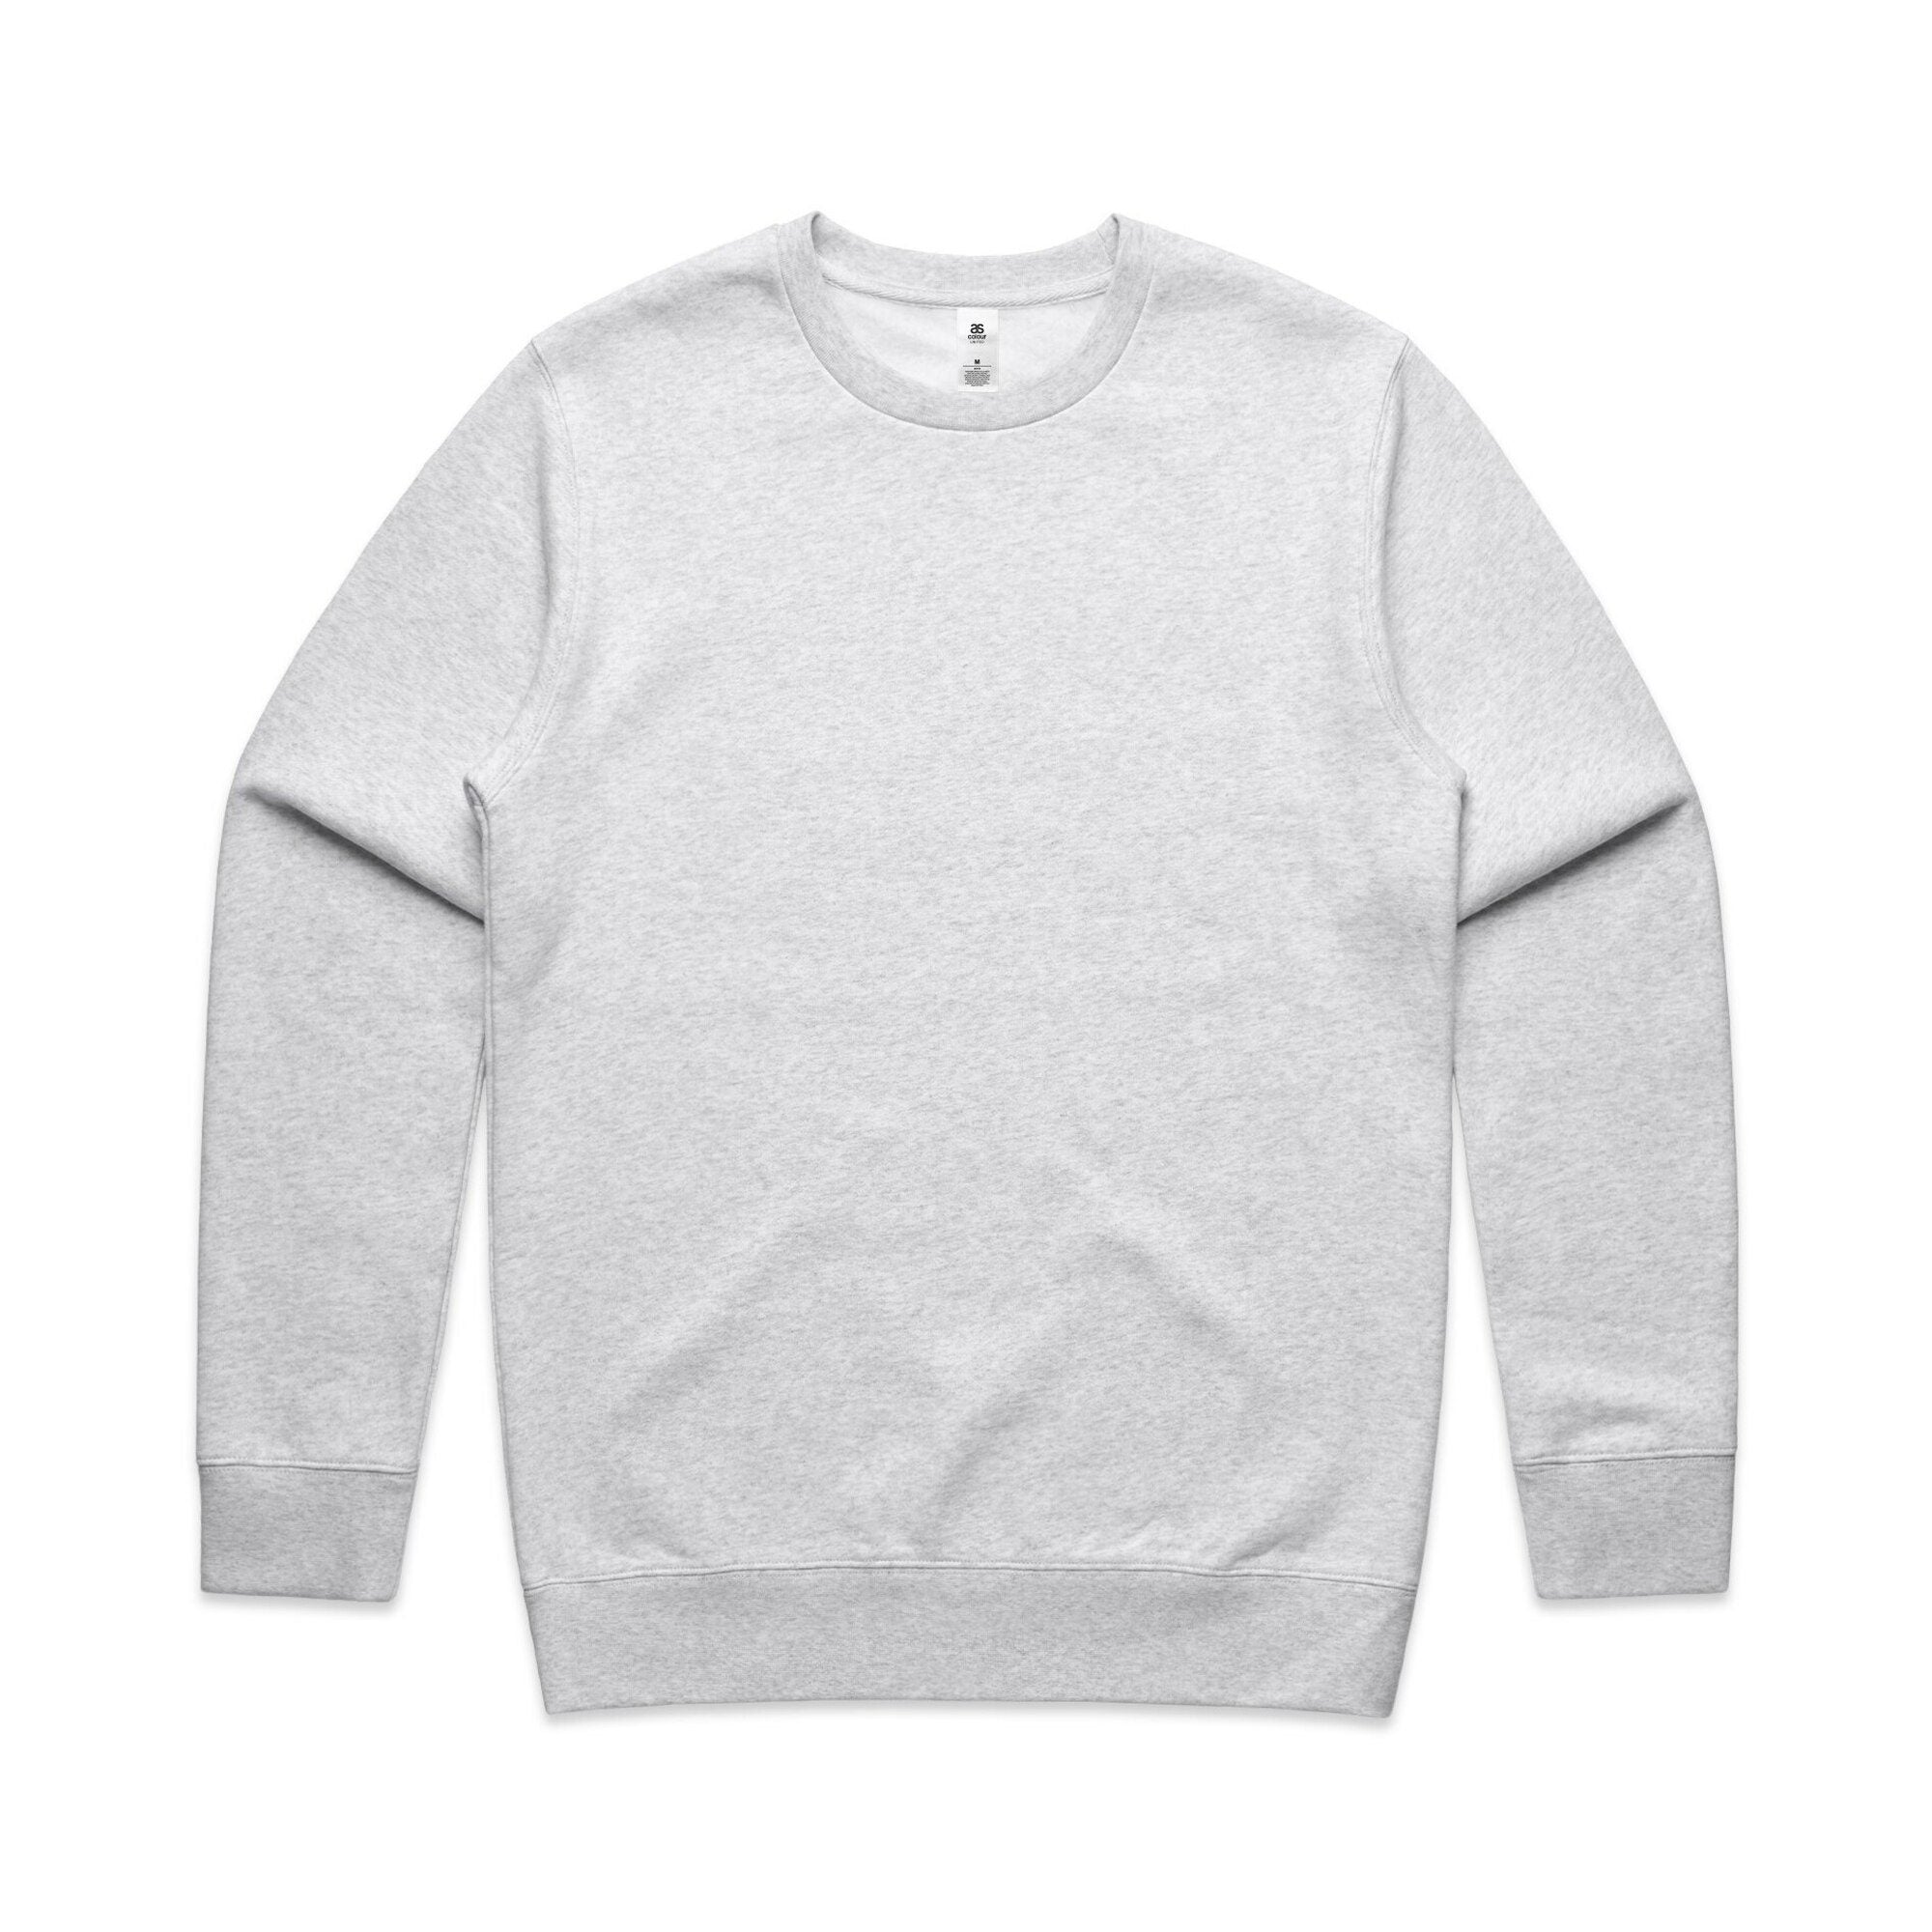 5130_AS_Mens-United-Crew_White-Marle